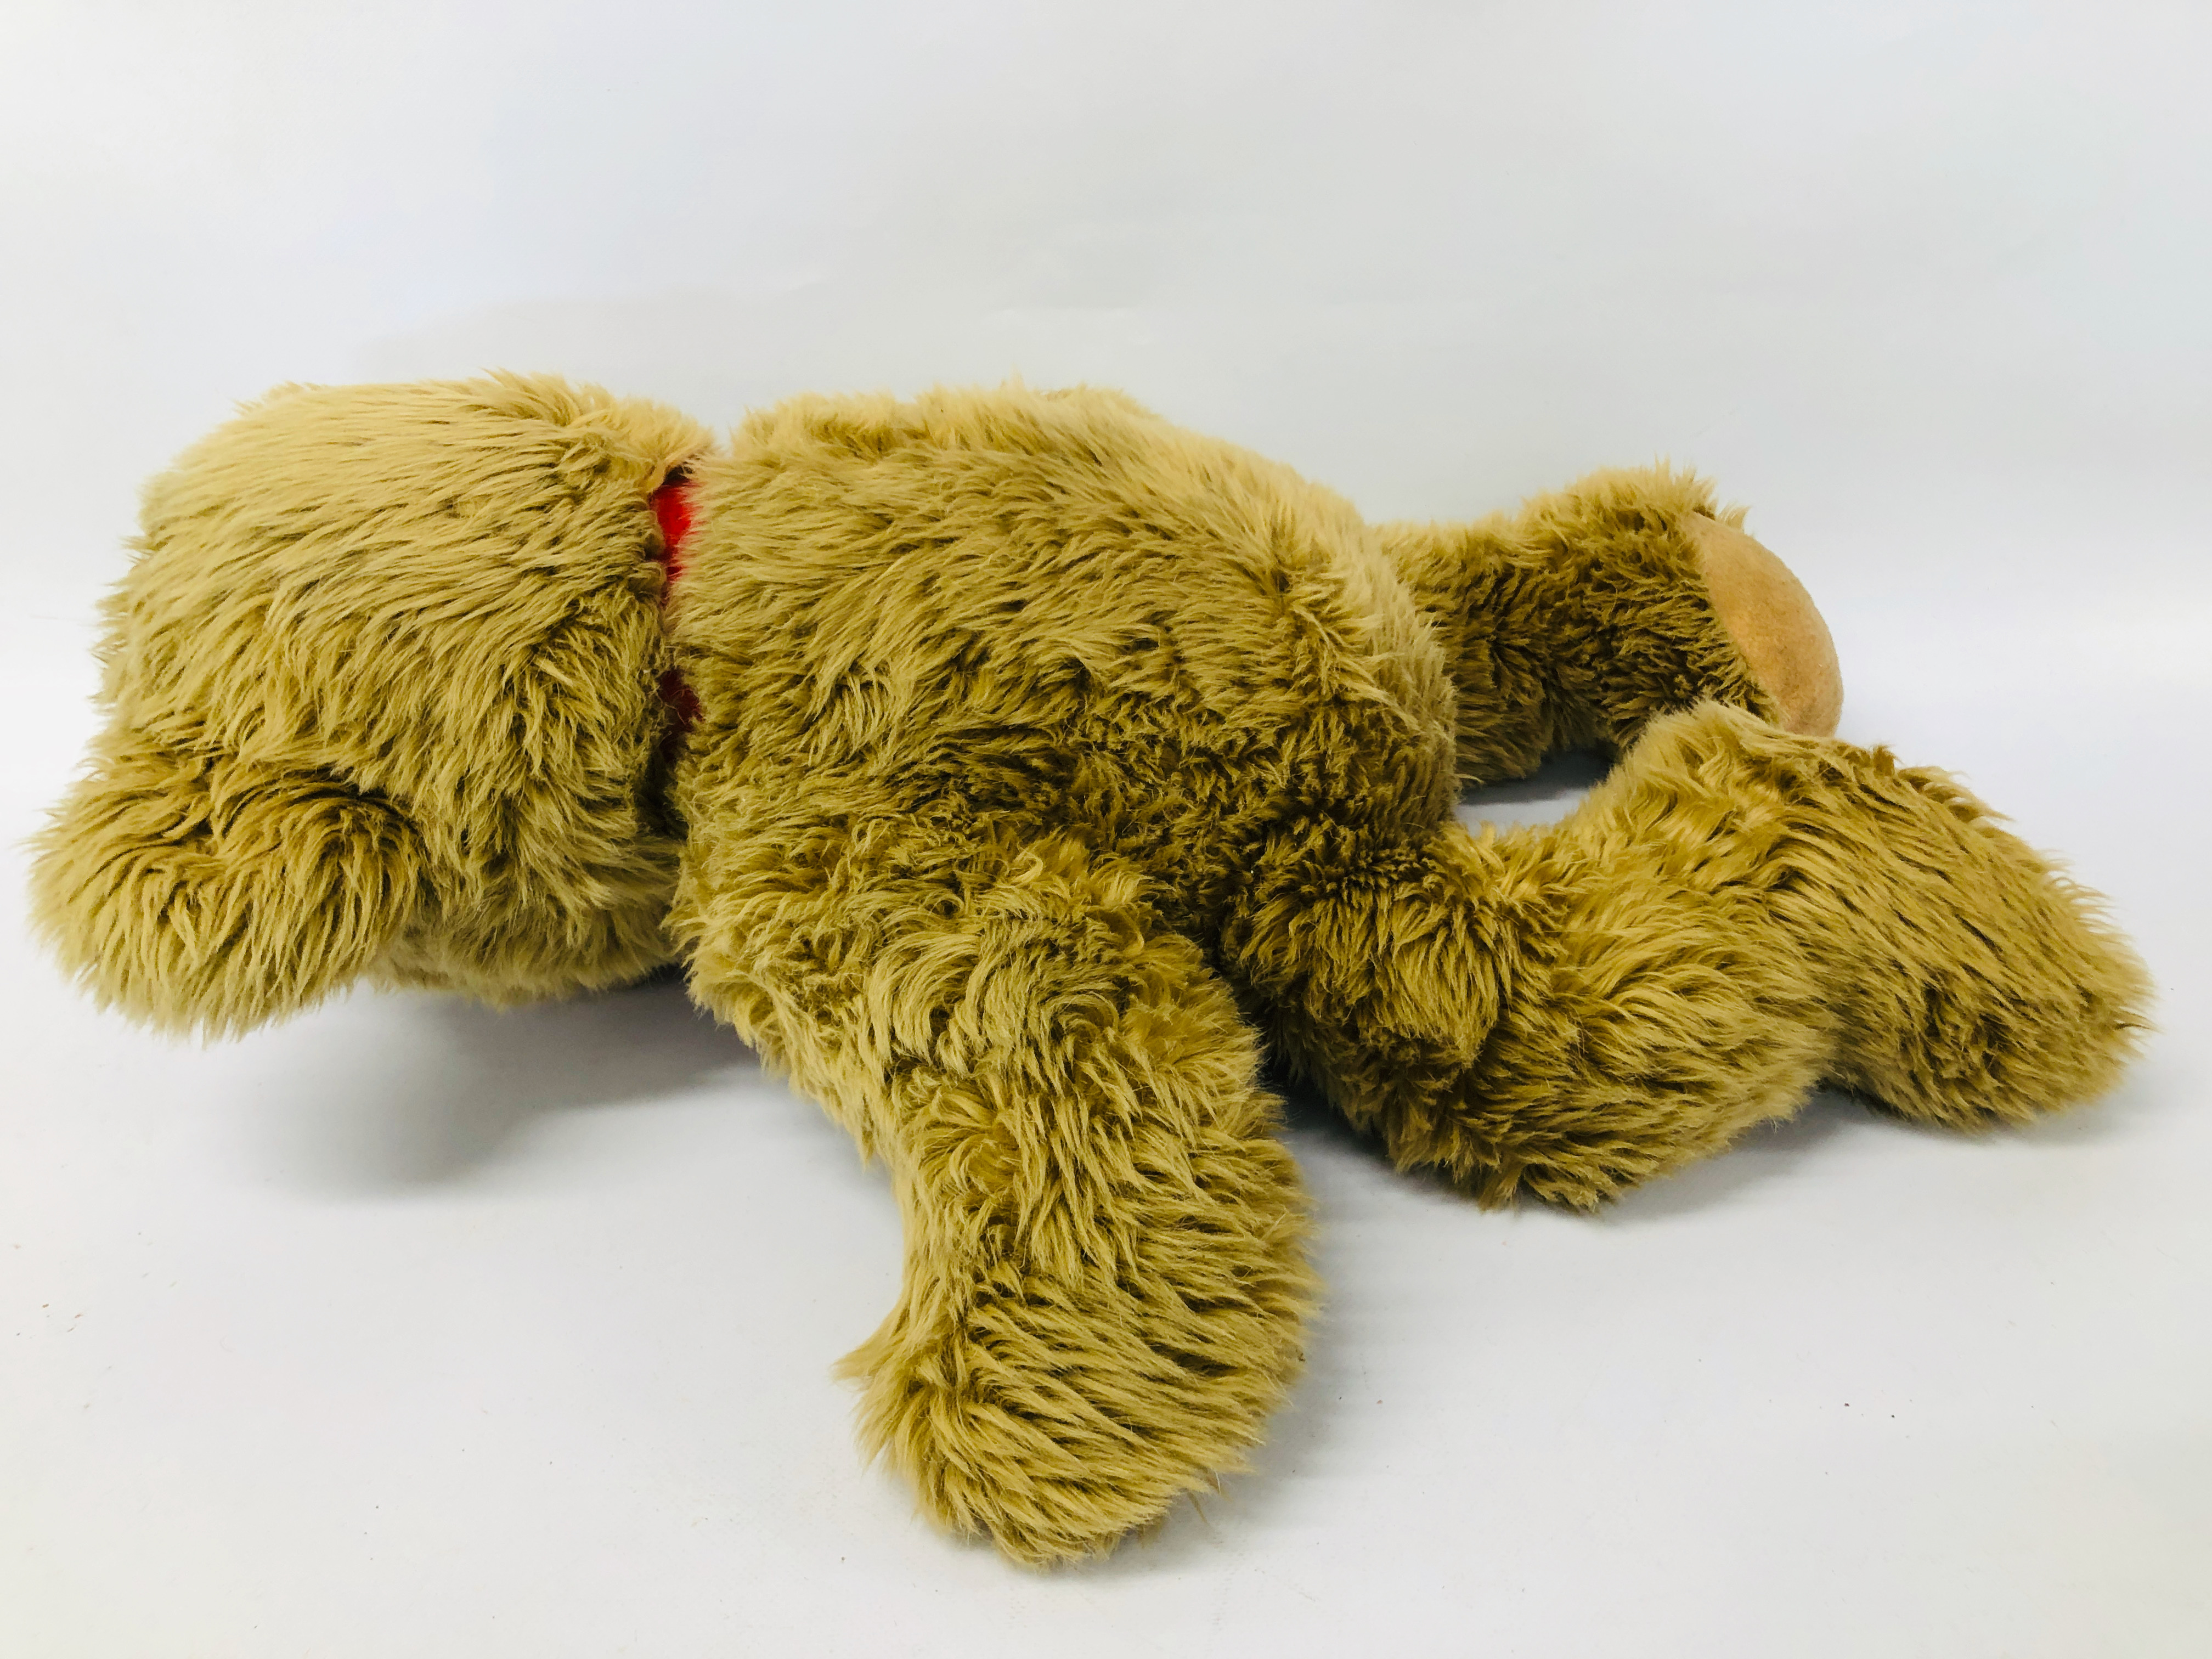 STEIFF TEDDY BEAR 013836 L 66CM APPROX (RED BOW REQUIRES ATTENTION) - Image 4 of 5